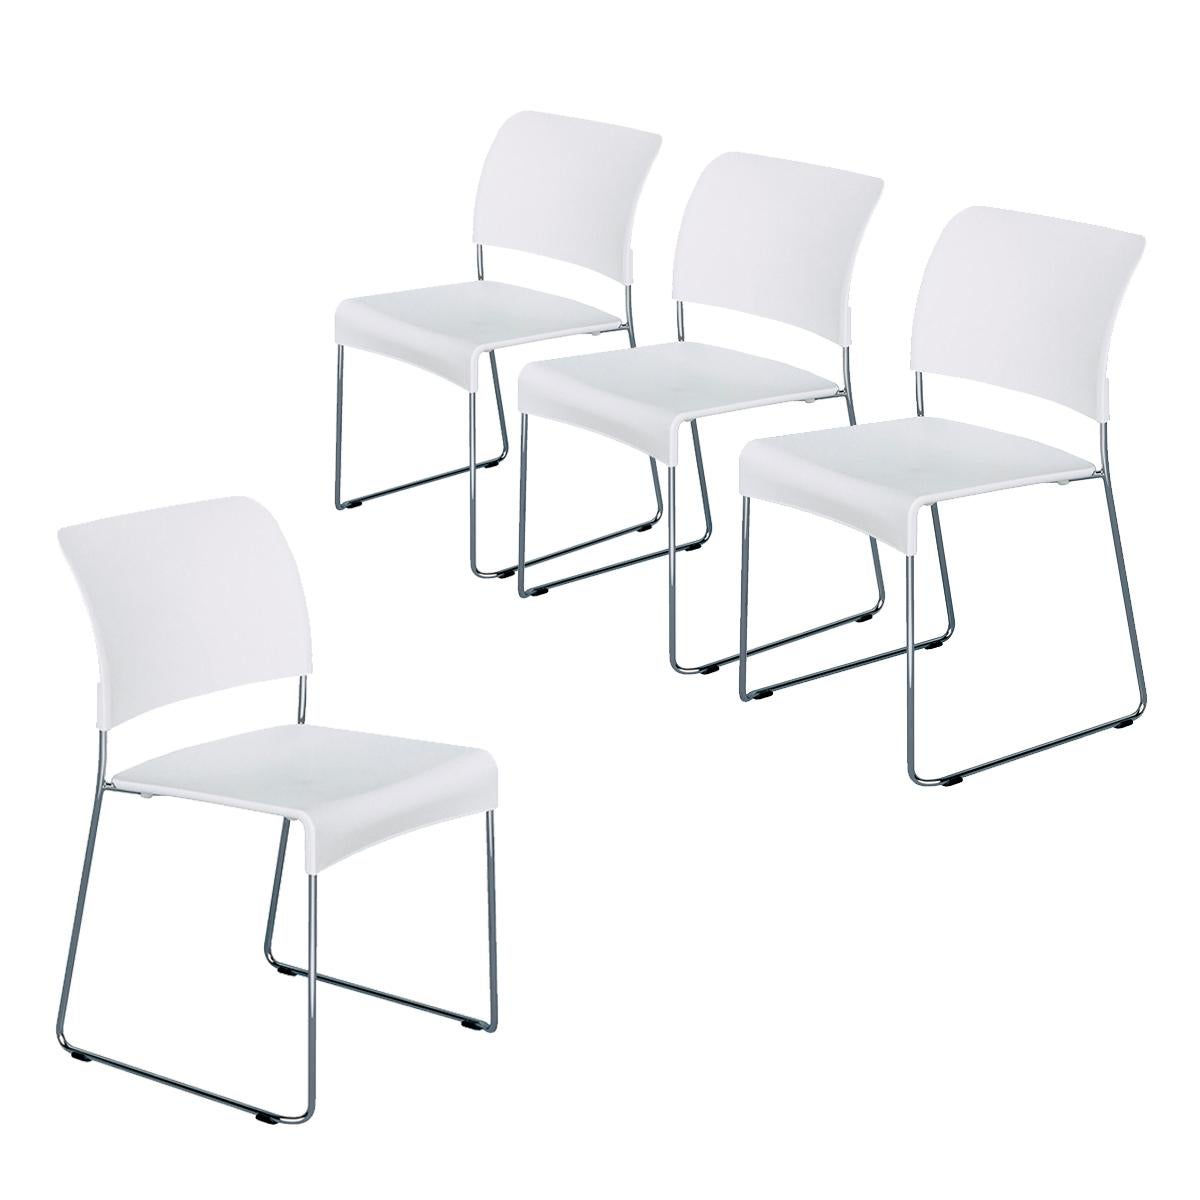 Chairs designed by Jasper Morrison in 1999
Manufactured by Vitra, Switzerland.

With SIM, Jasper Morrison has created the perfect expression of the chair type inaugurated by David Rowland’s famed 40/4 chair in the 1960s. SIM is a successful